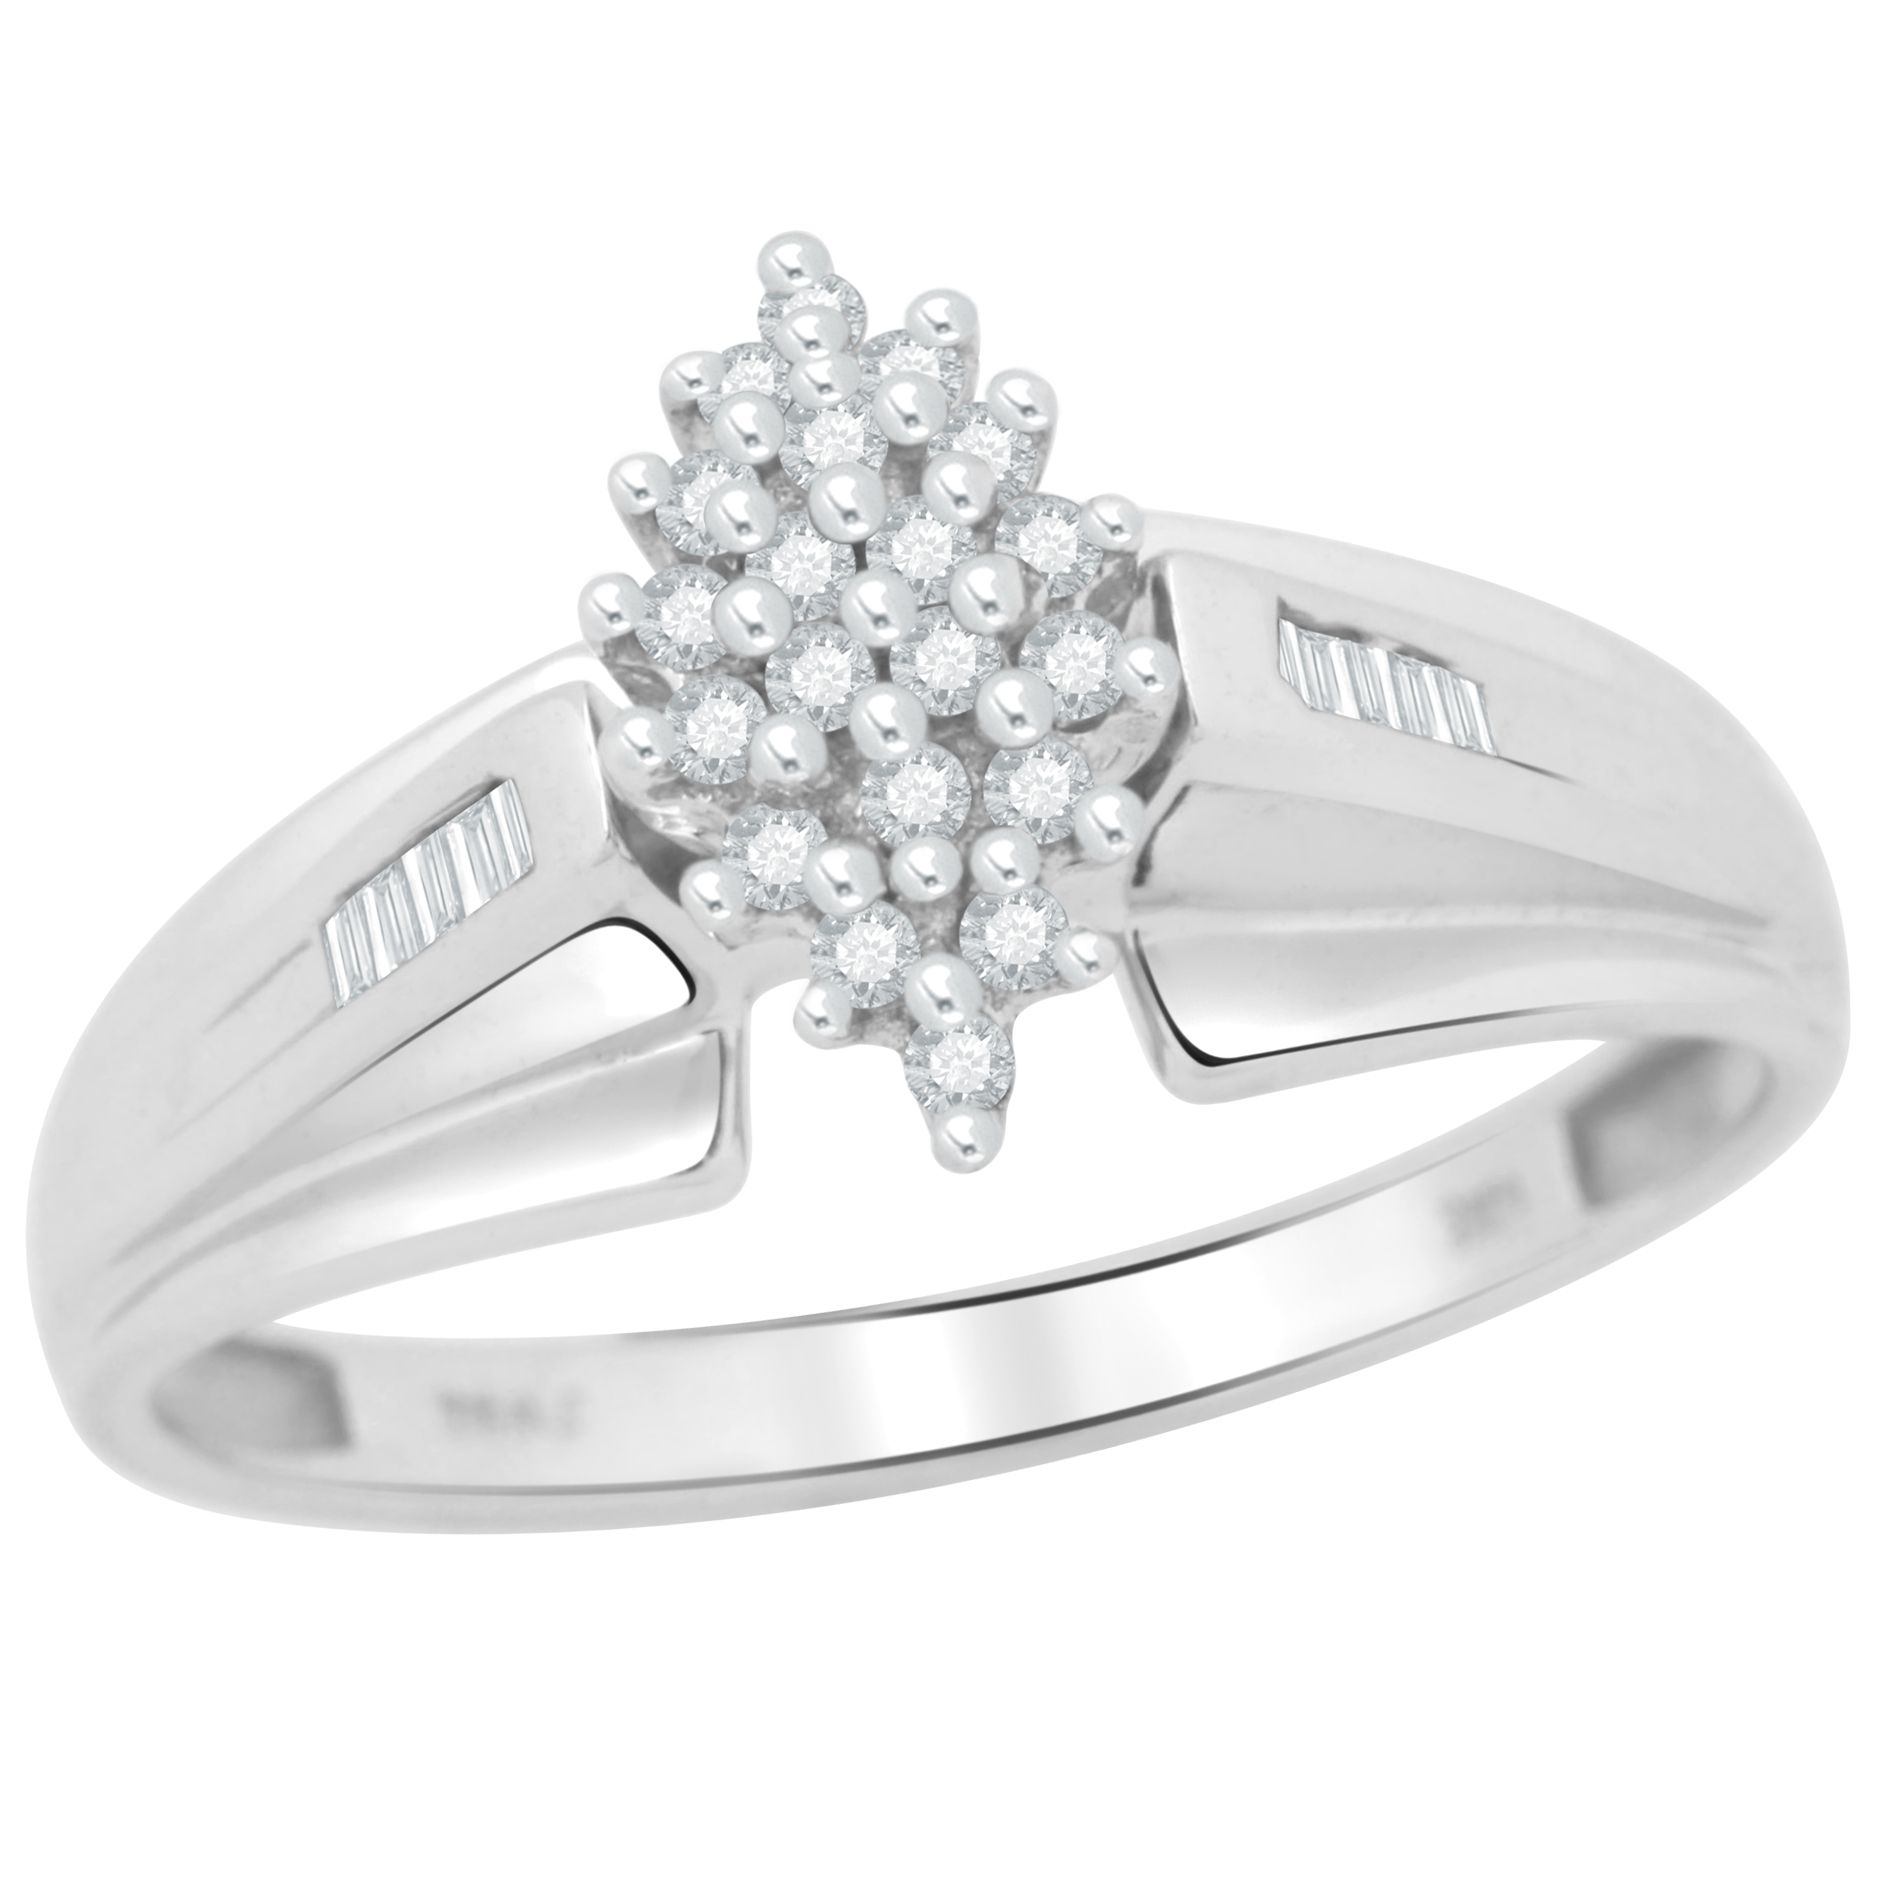 1/5 cttw Diamond Cluster Ring_in Size 7